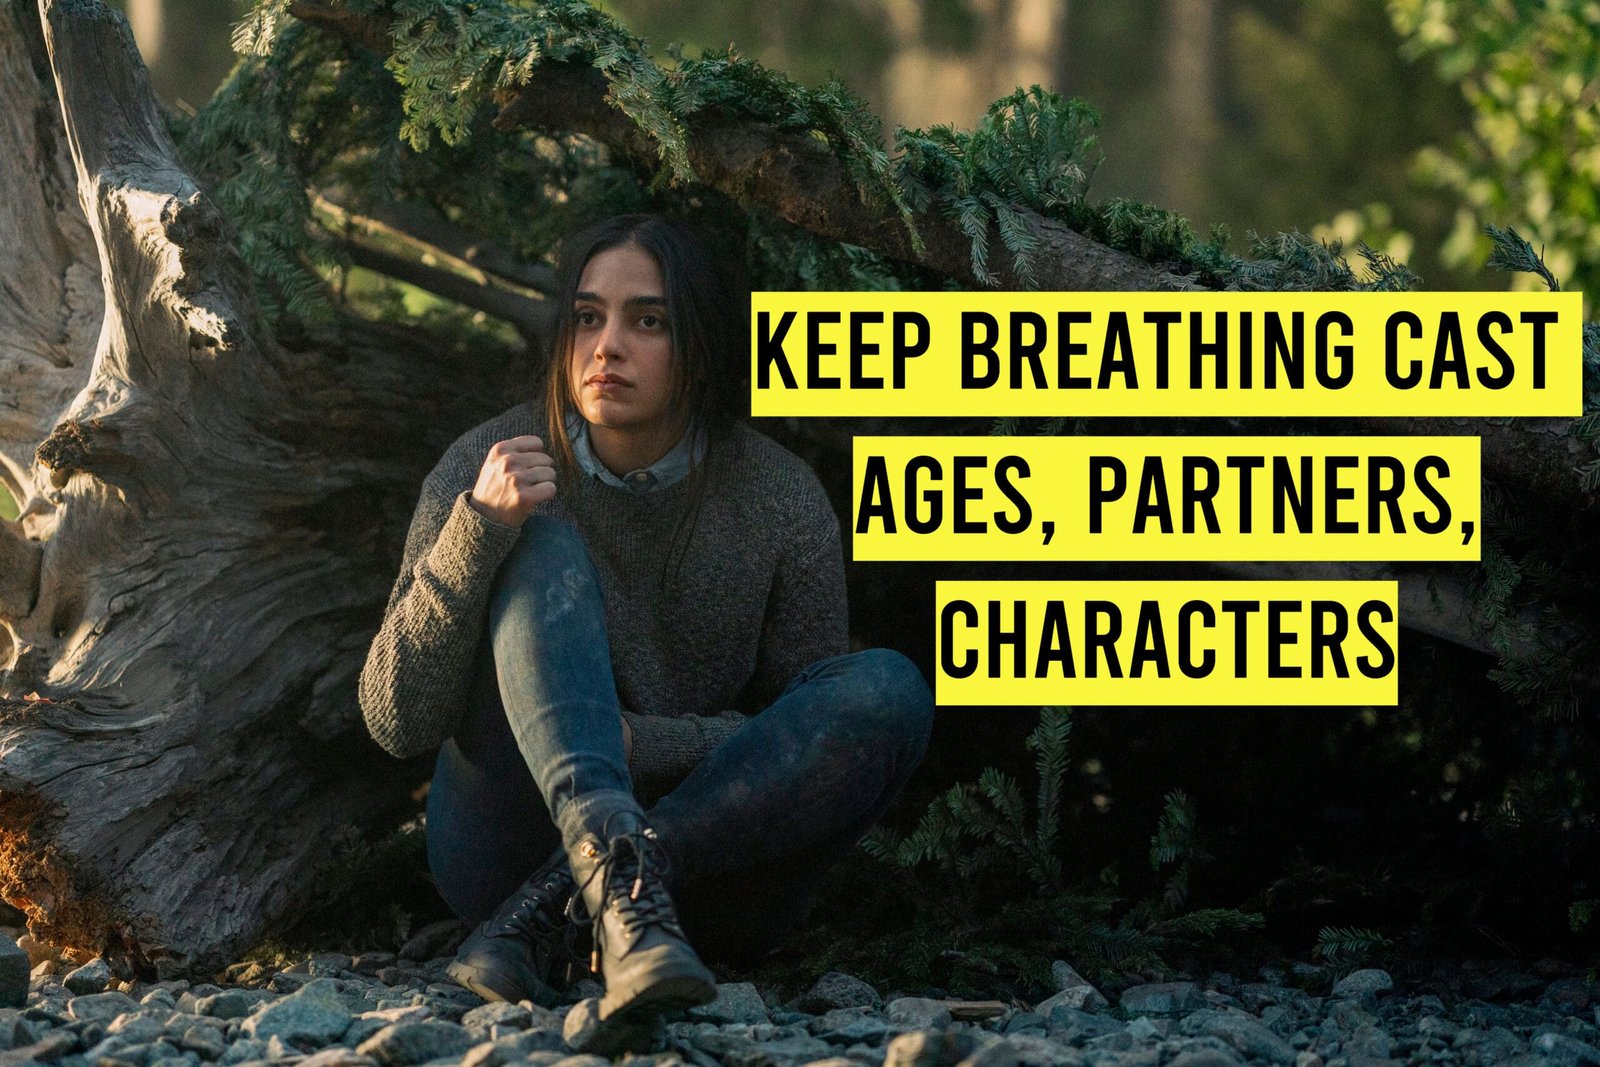 Keep Breathing Cast - Ages, Partners, Characters